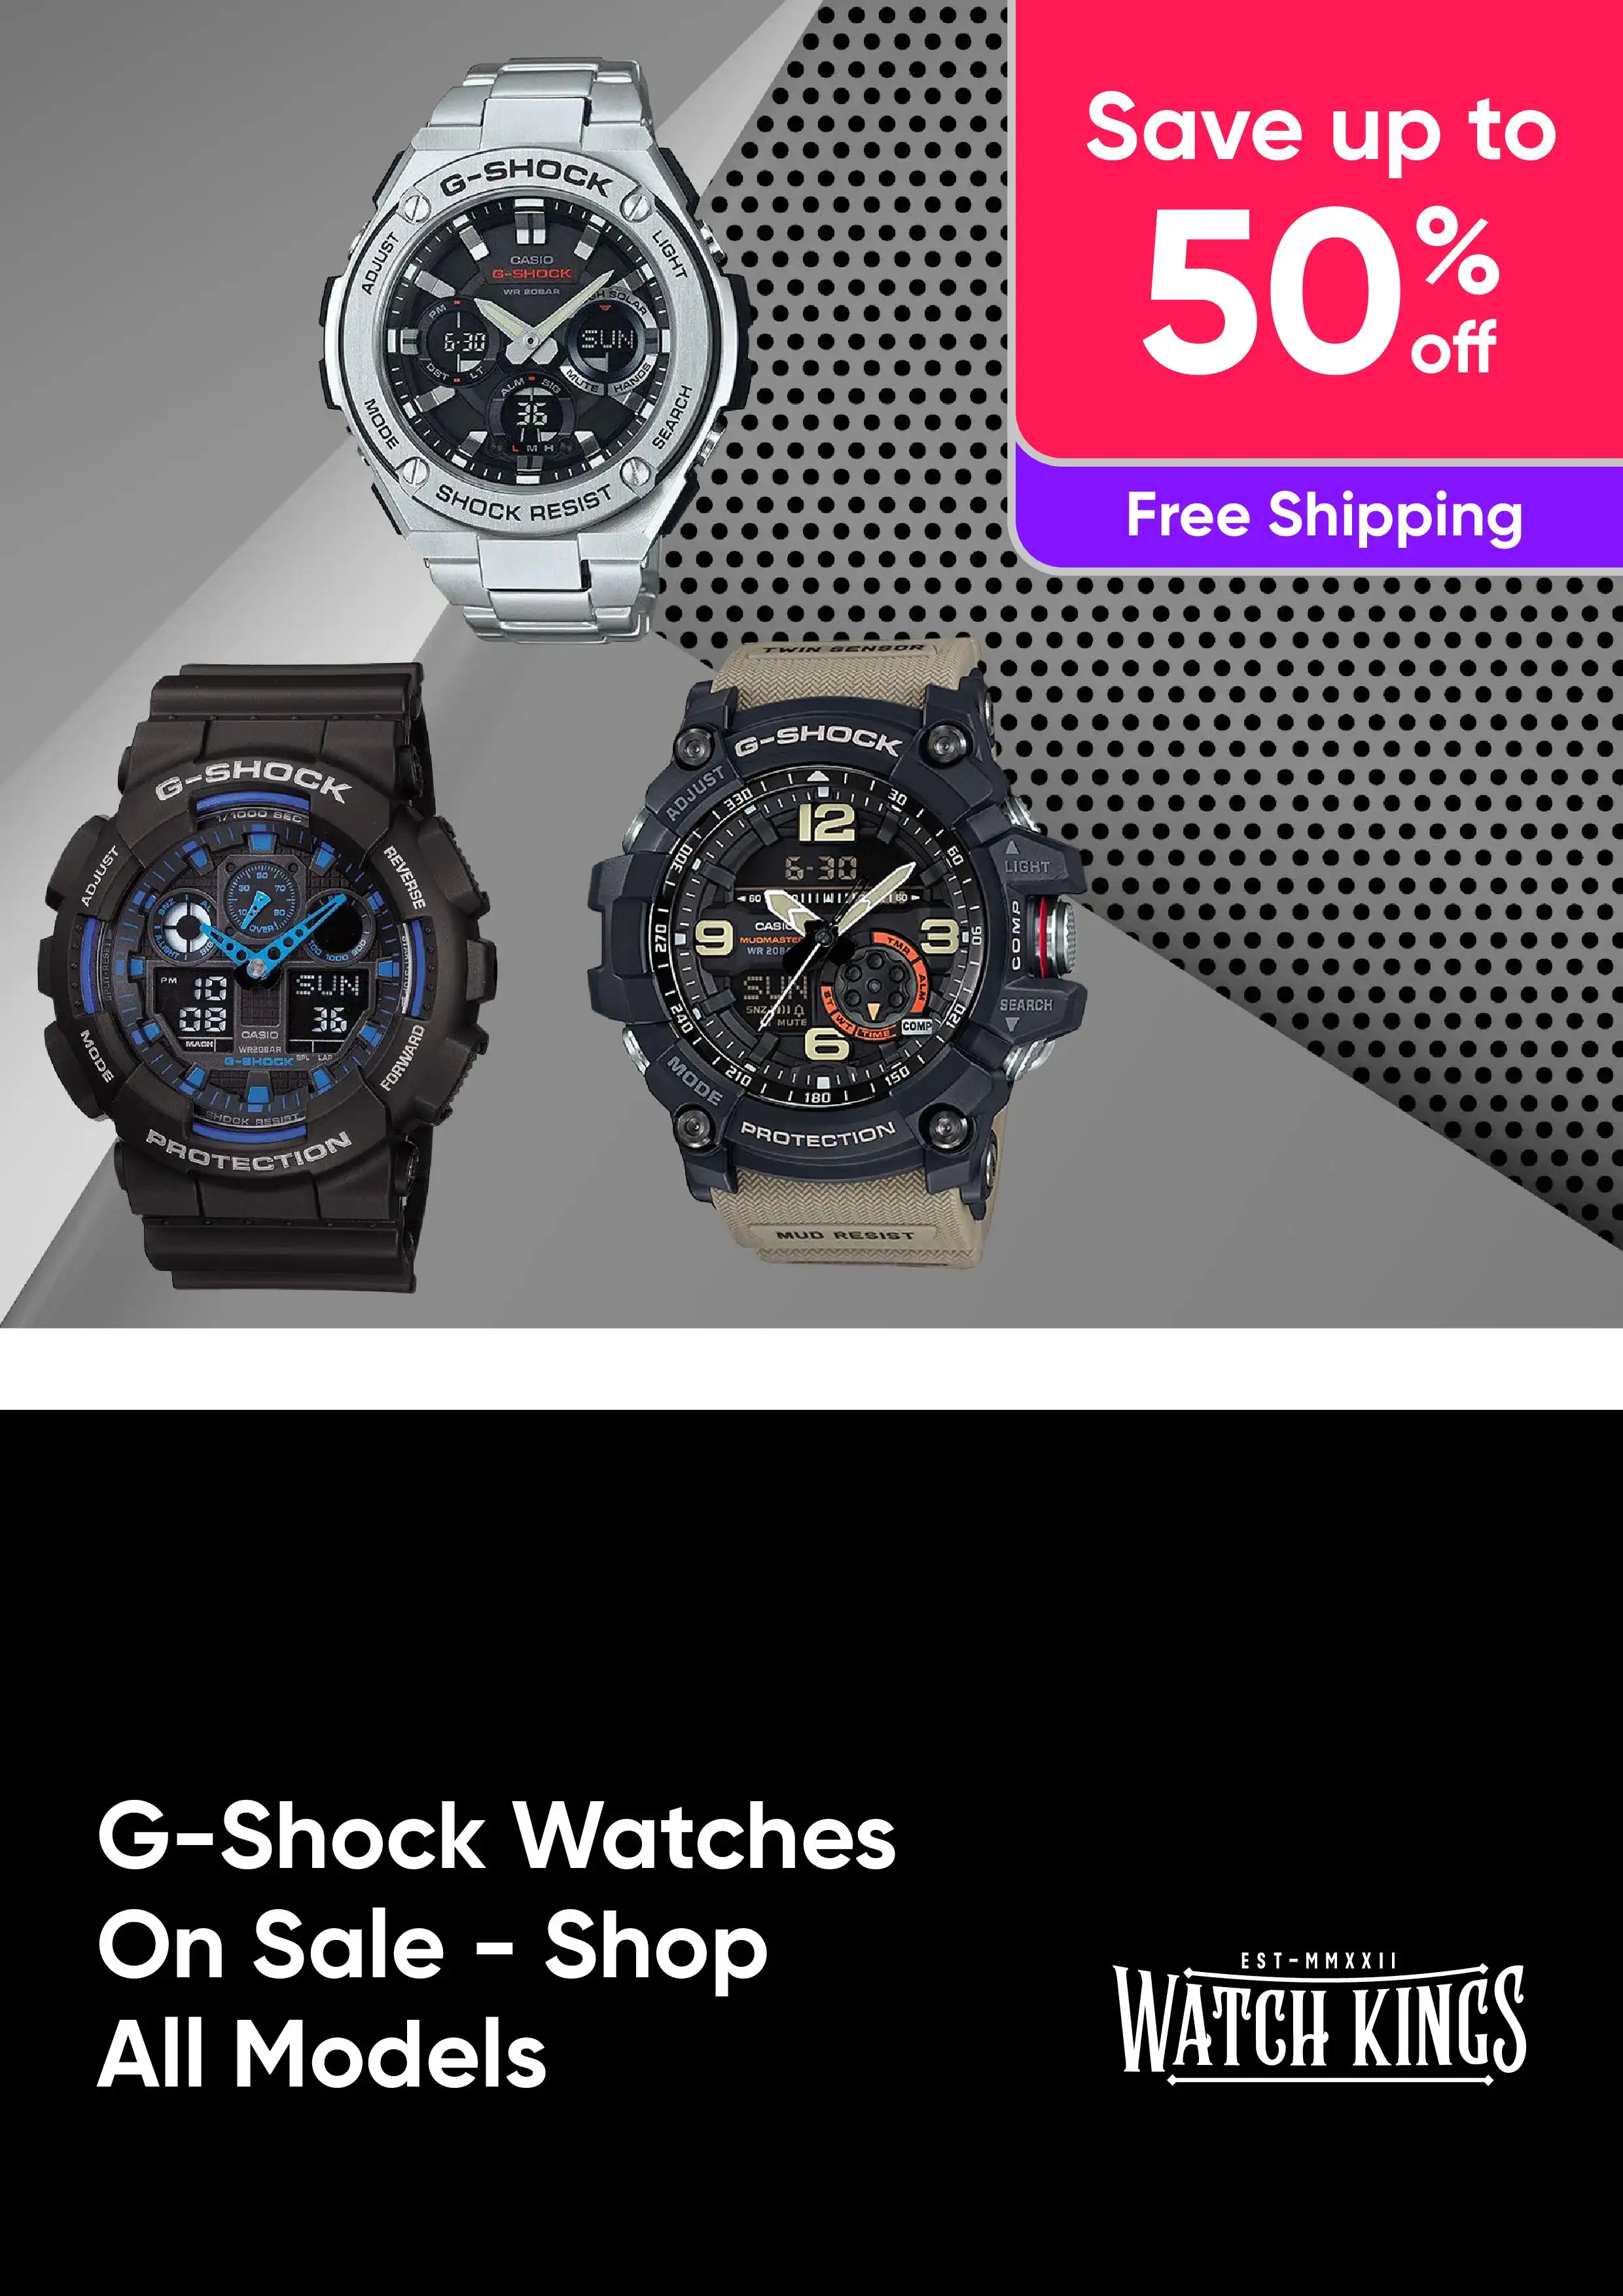 G-Shock Watches On Sale - Shop All Models - Up to 50% Off RRP